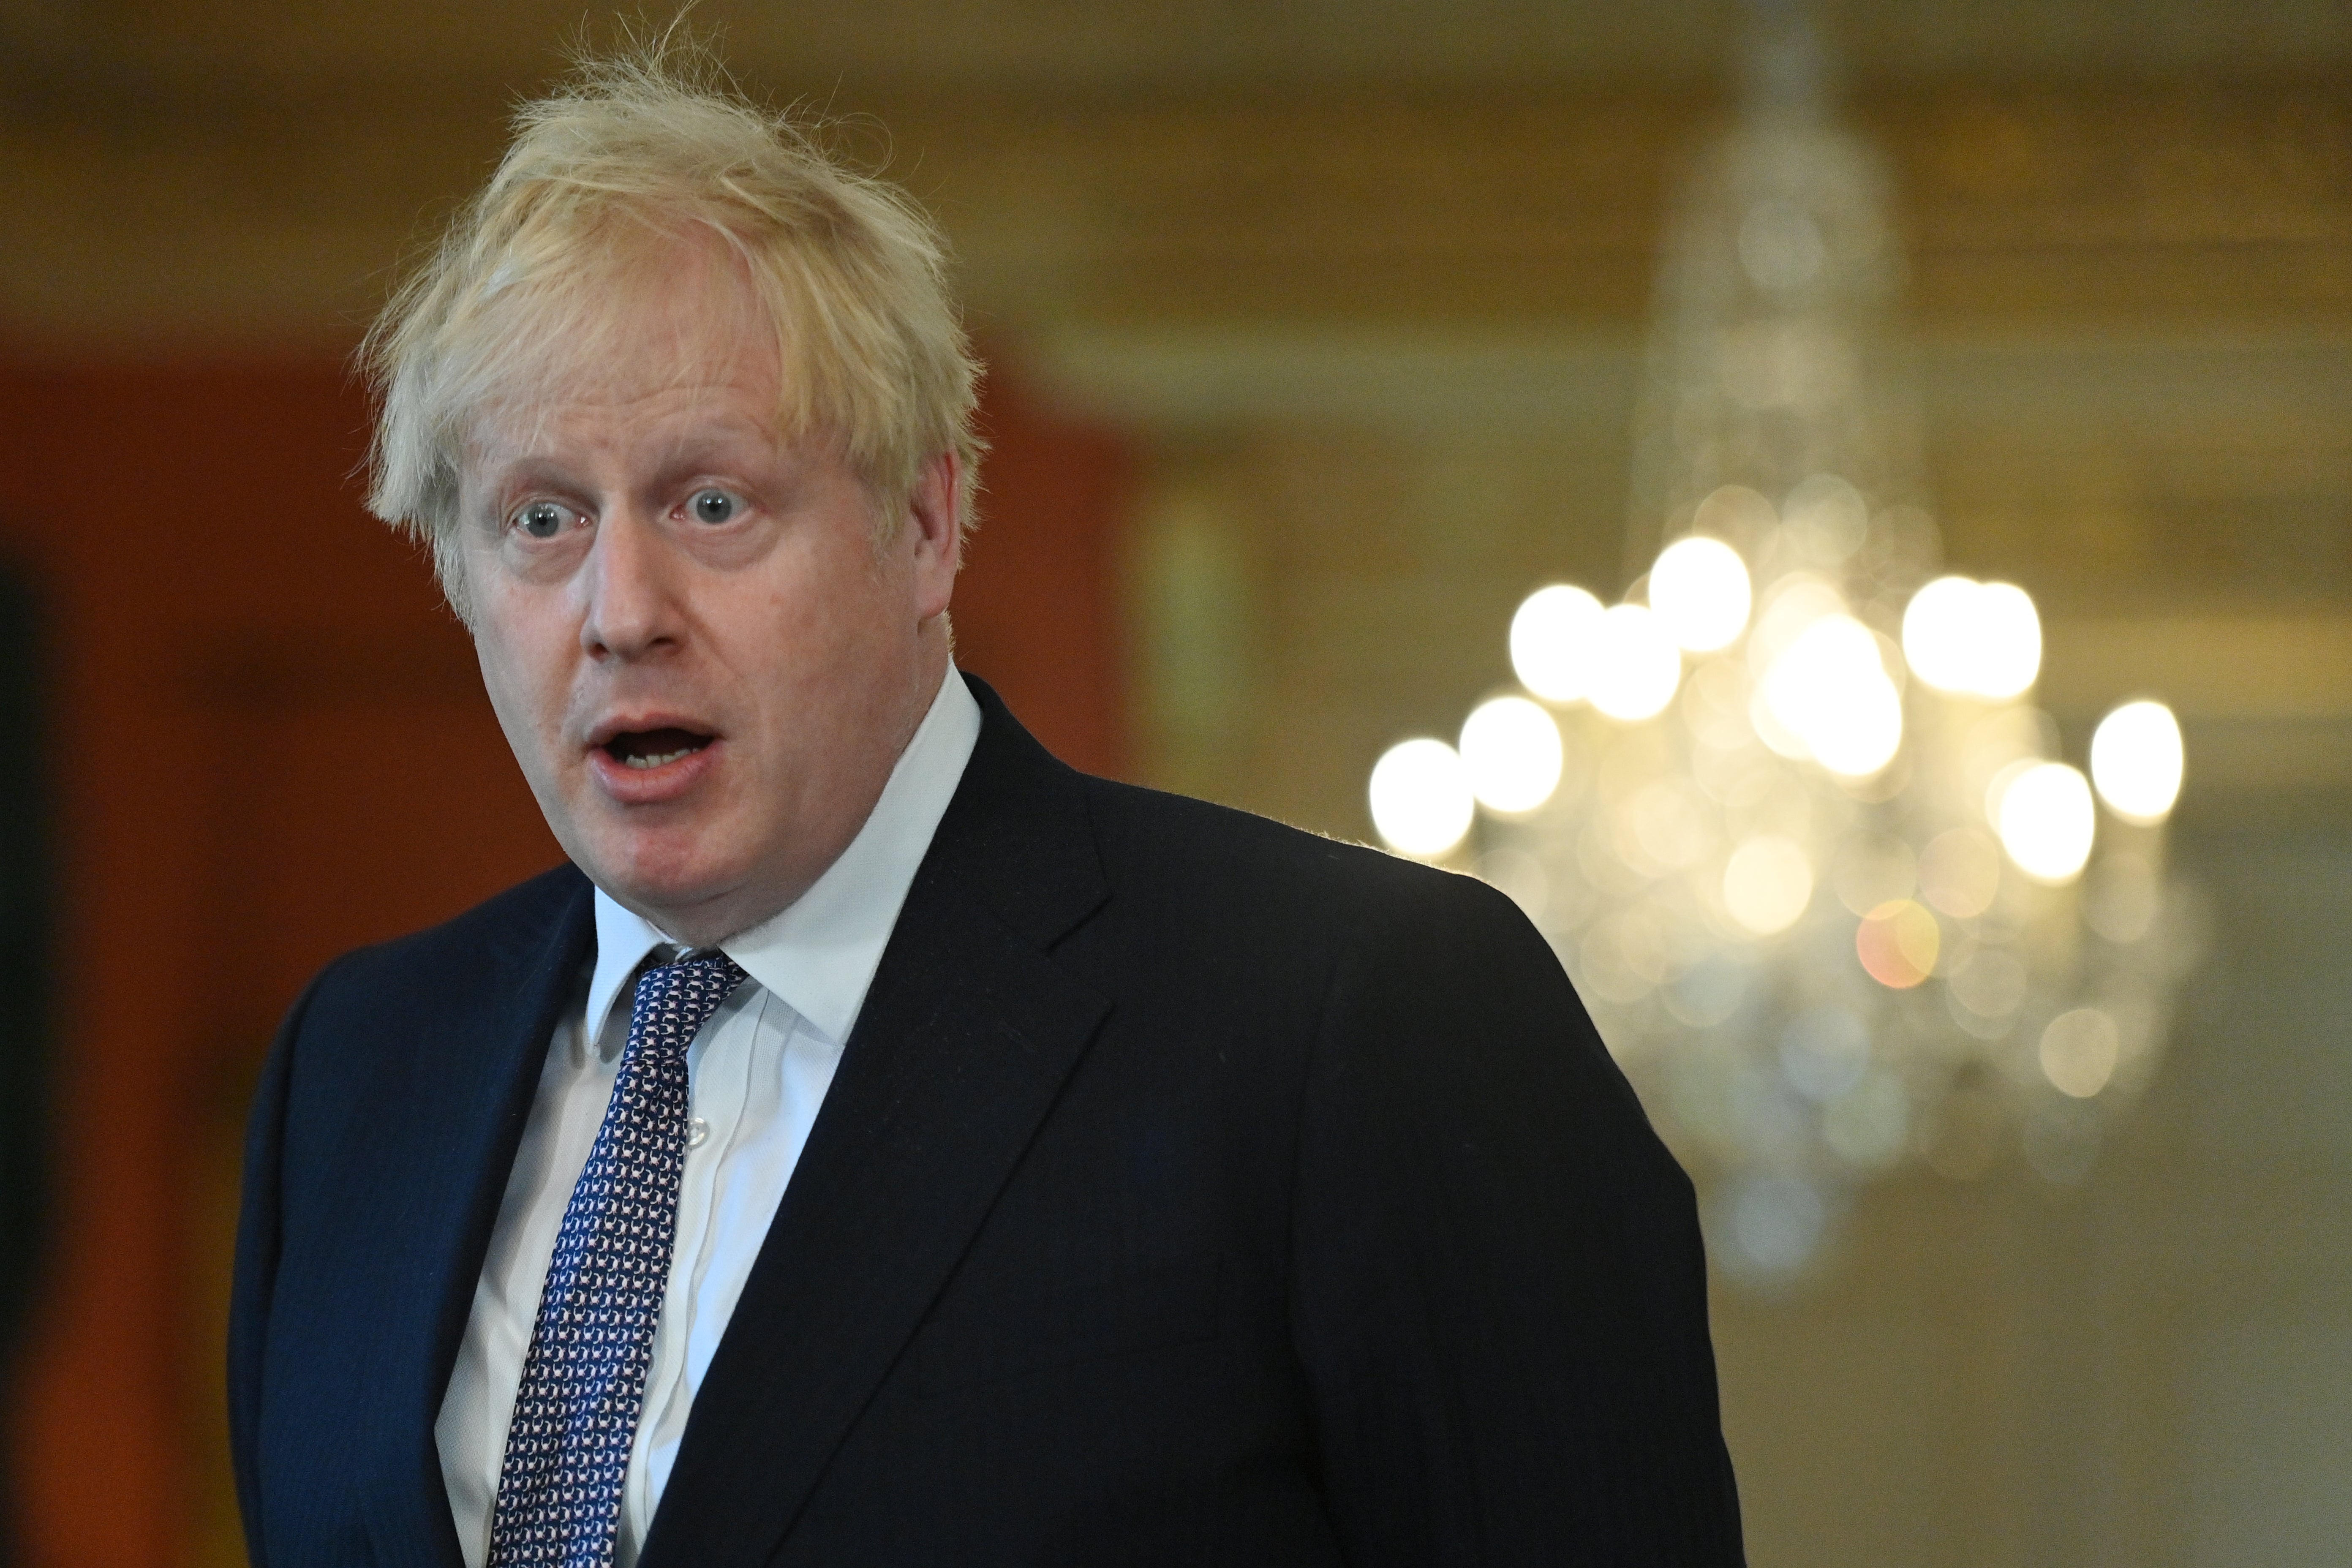 ‘Boris Johnson, whether through incompetence or indecision, has dodged the tough decisions’